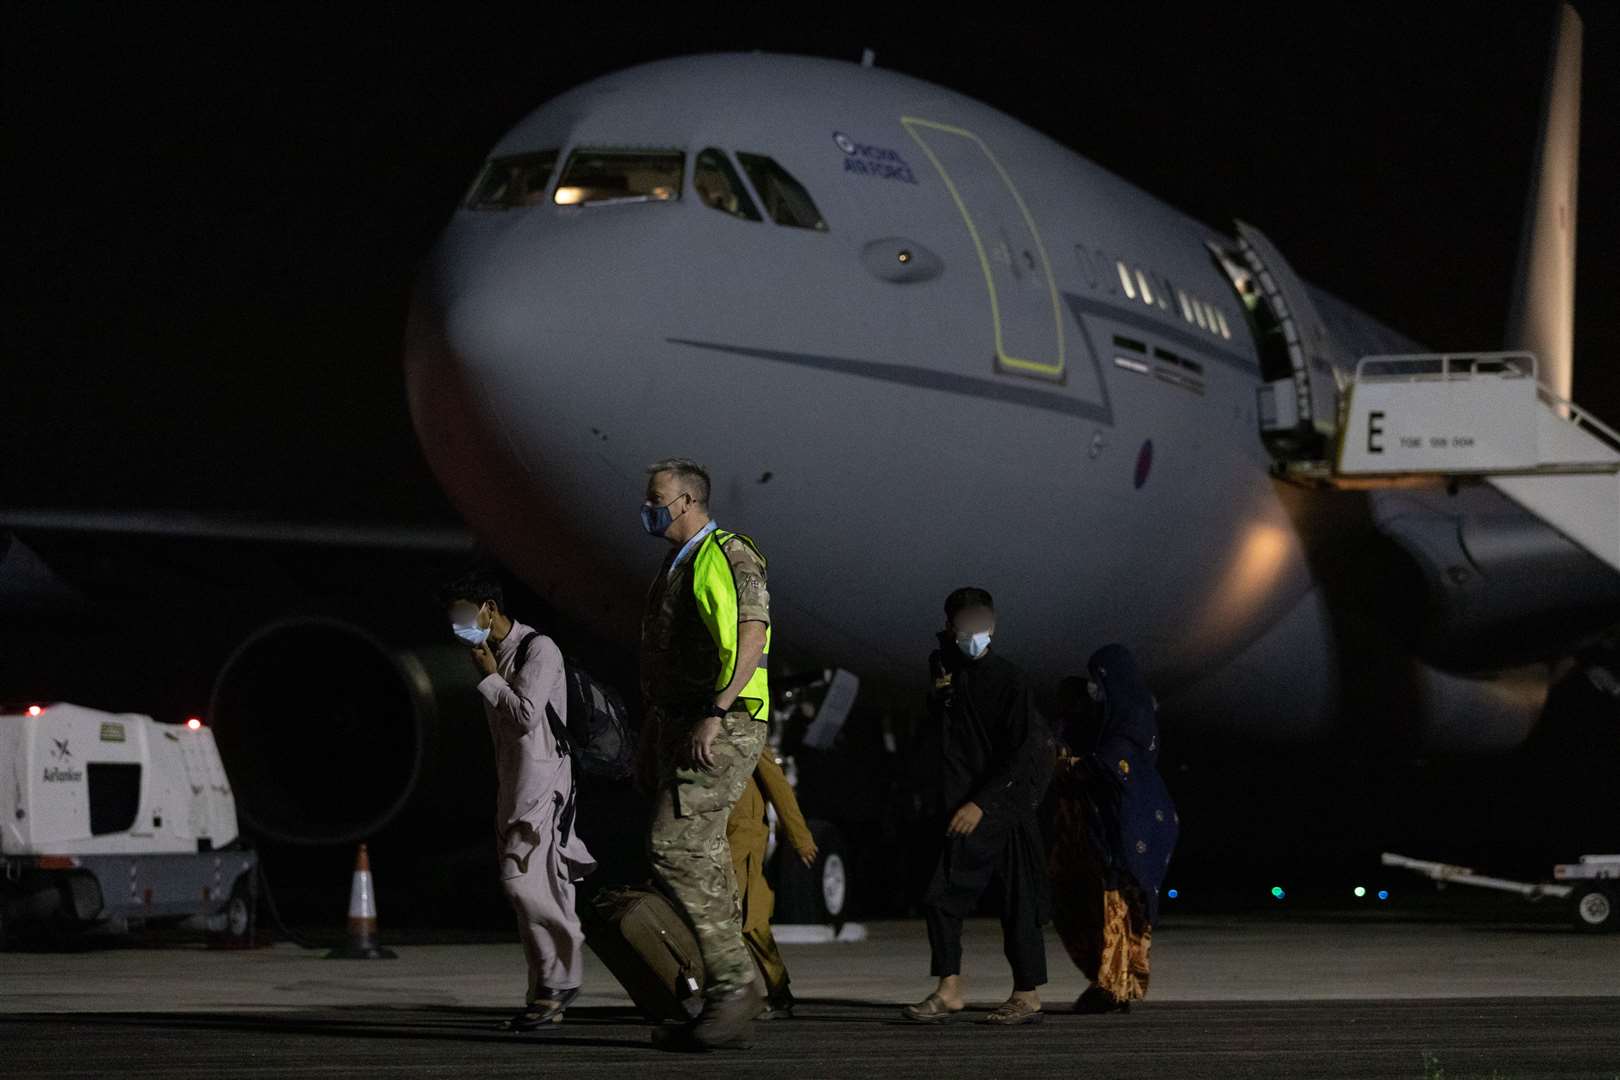 RAF Brize Norton personnel escorting passengers last Thursday from a RAF Voyager aircraft bringing refugees from Afghanistan. Picture: UK MOD